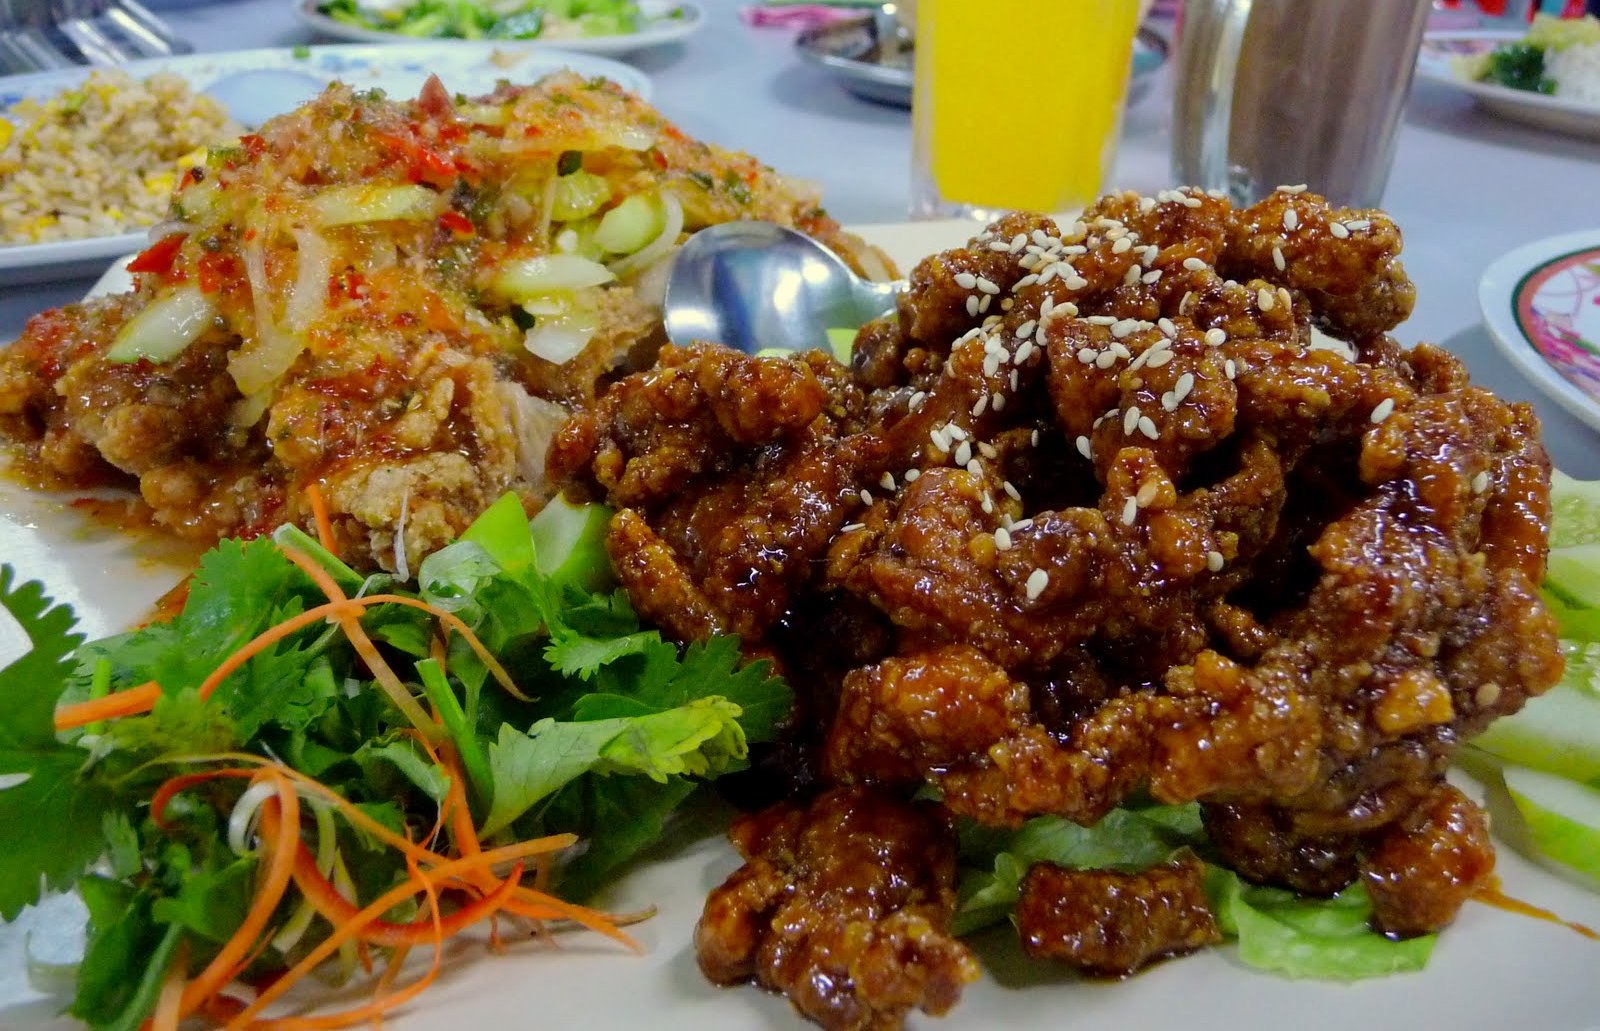 [PHOTOS] SAYS Top 10 Halal Restaurants To Satisfy Your Chinese Food